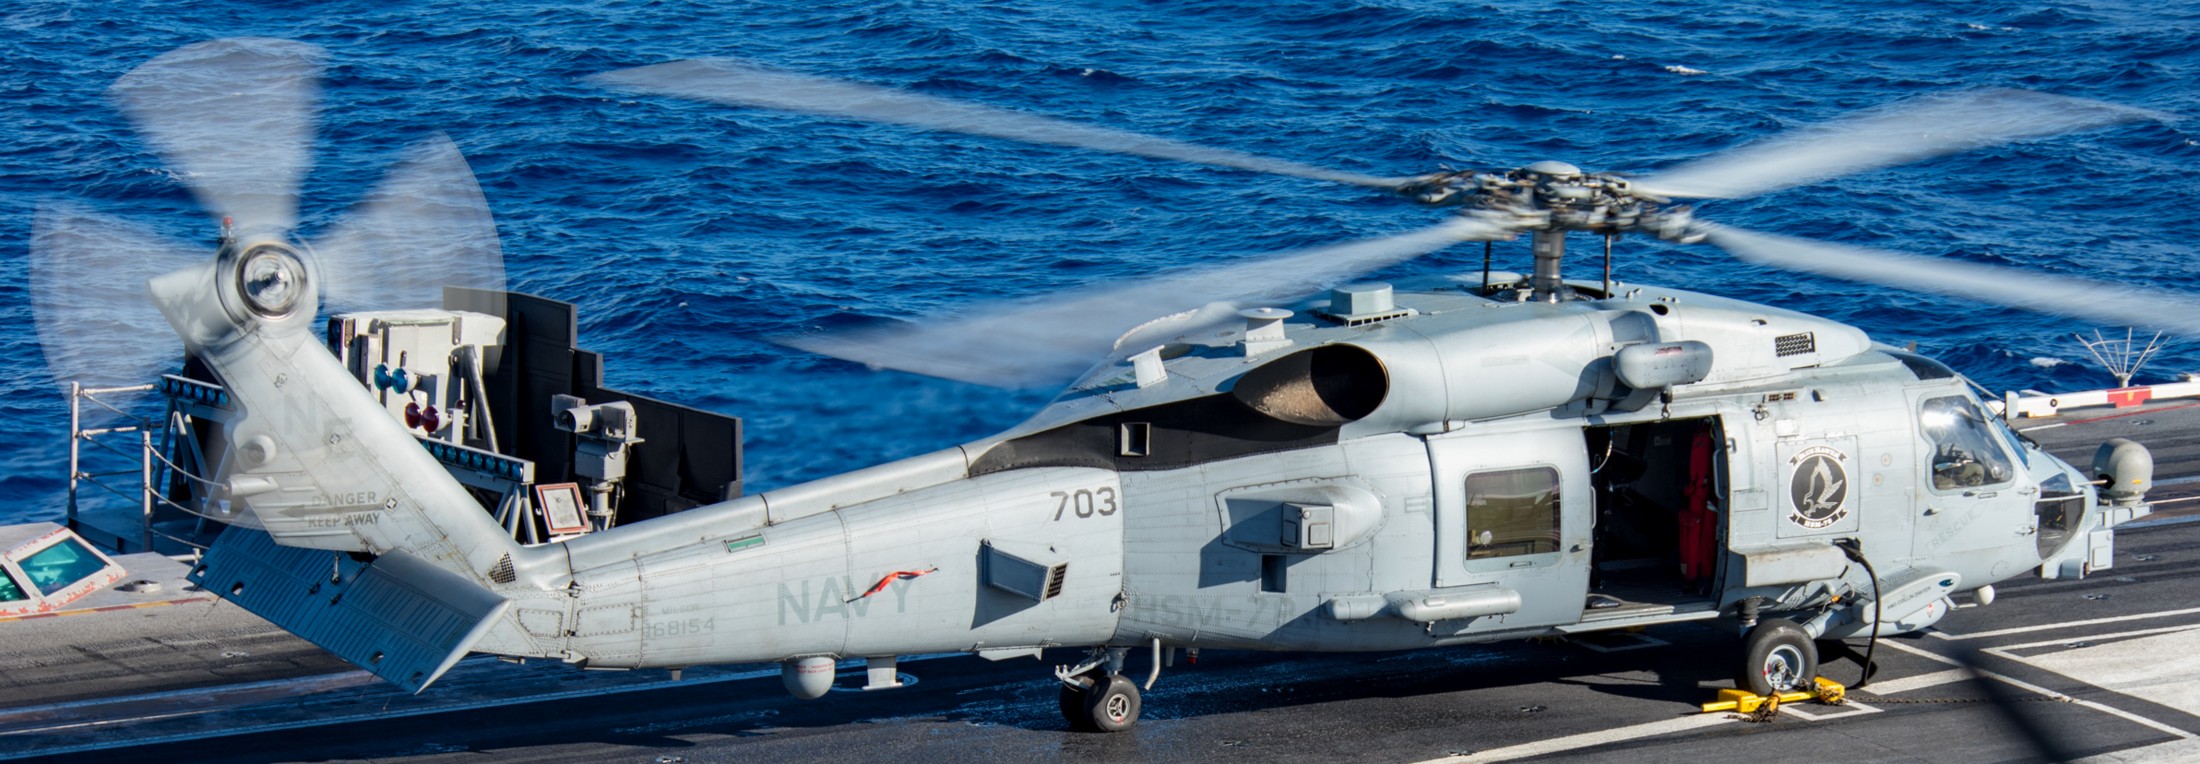 hsm-78 blue hawks helicopter maritime strike squadron mh-60r seahawk us navy 2014 28